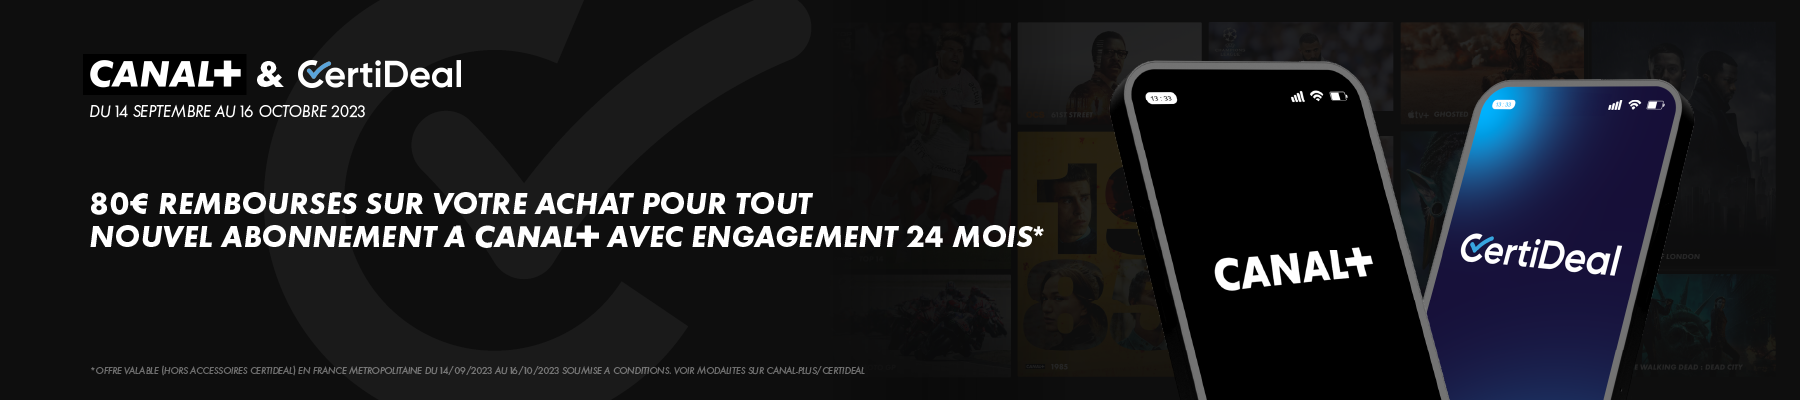 Offre exclusive Canal+ & CertiDeal